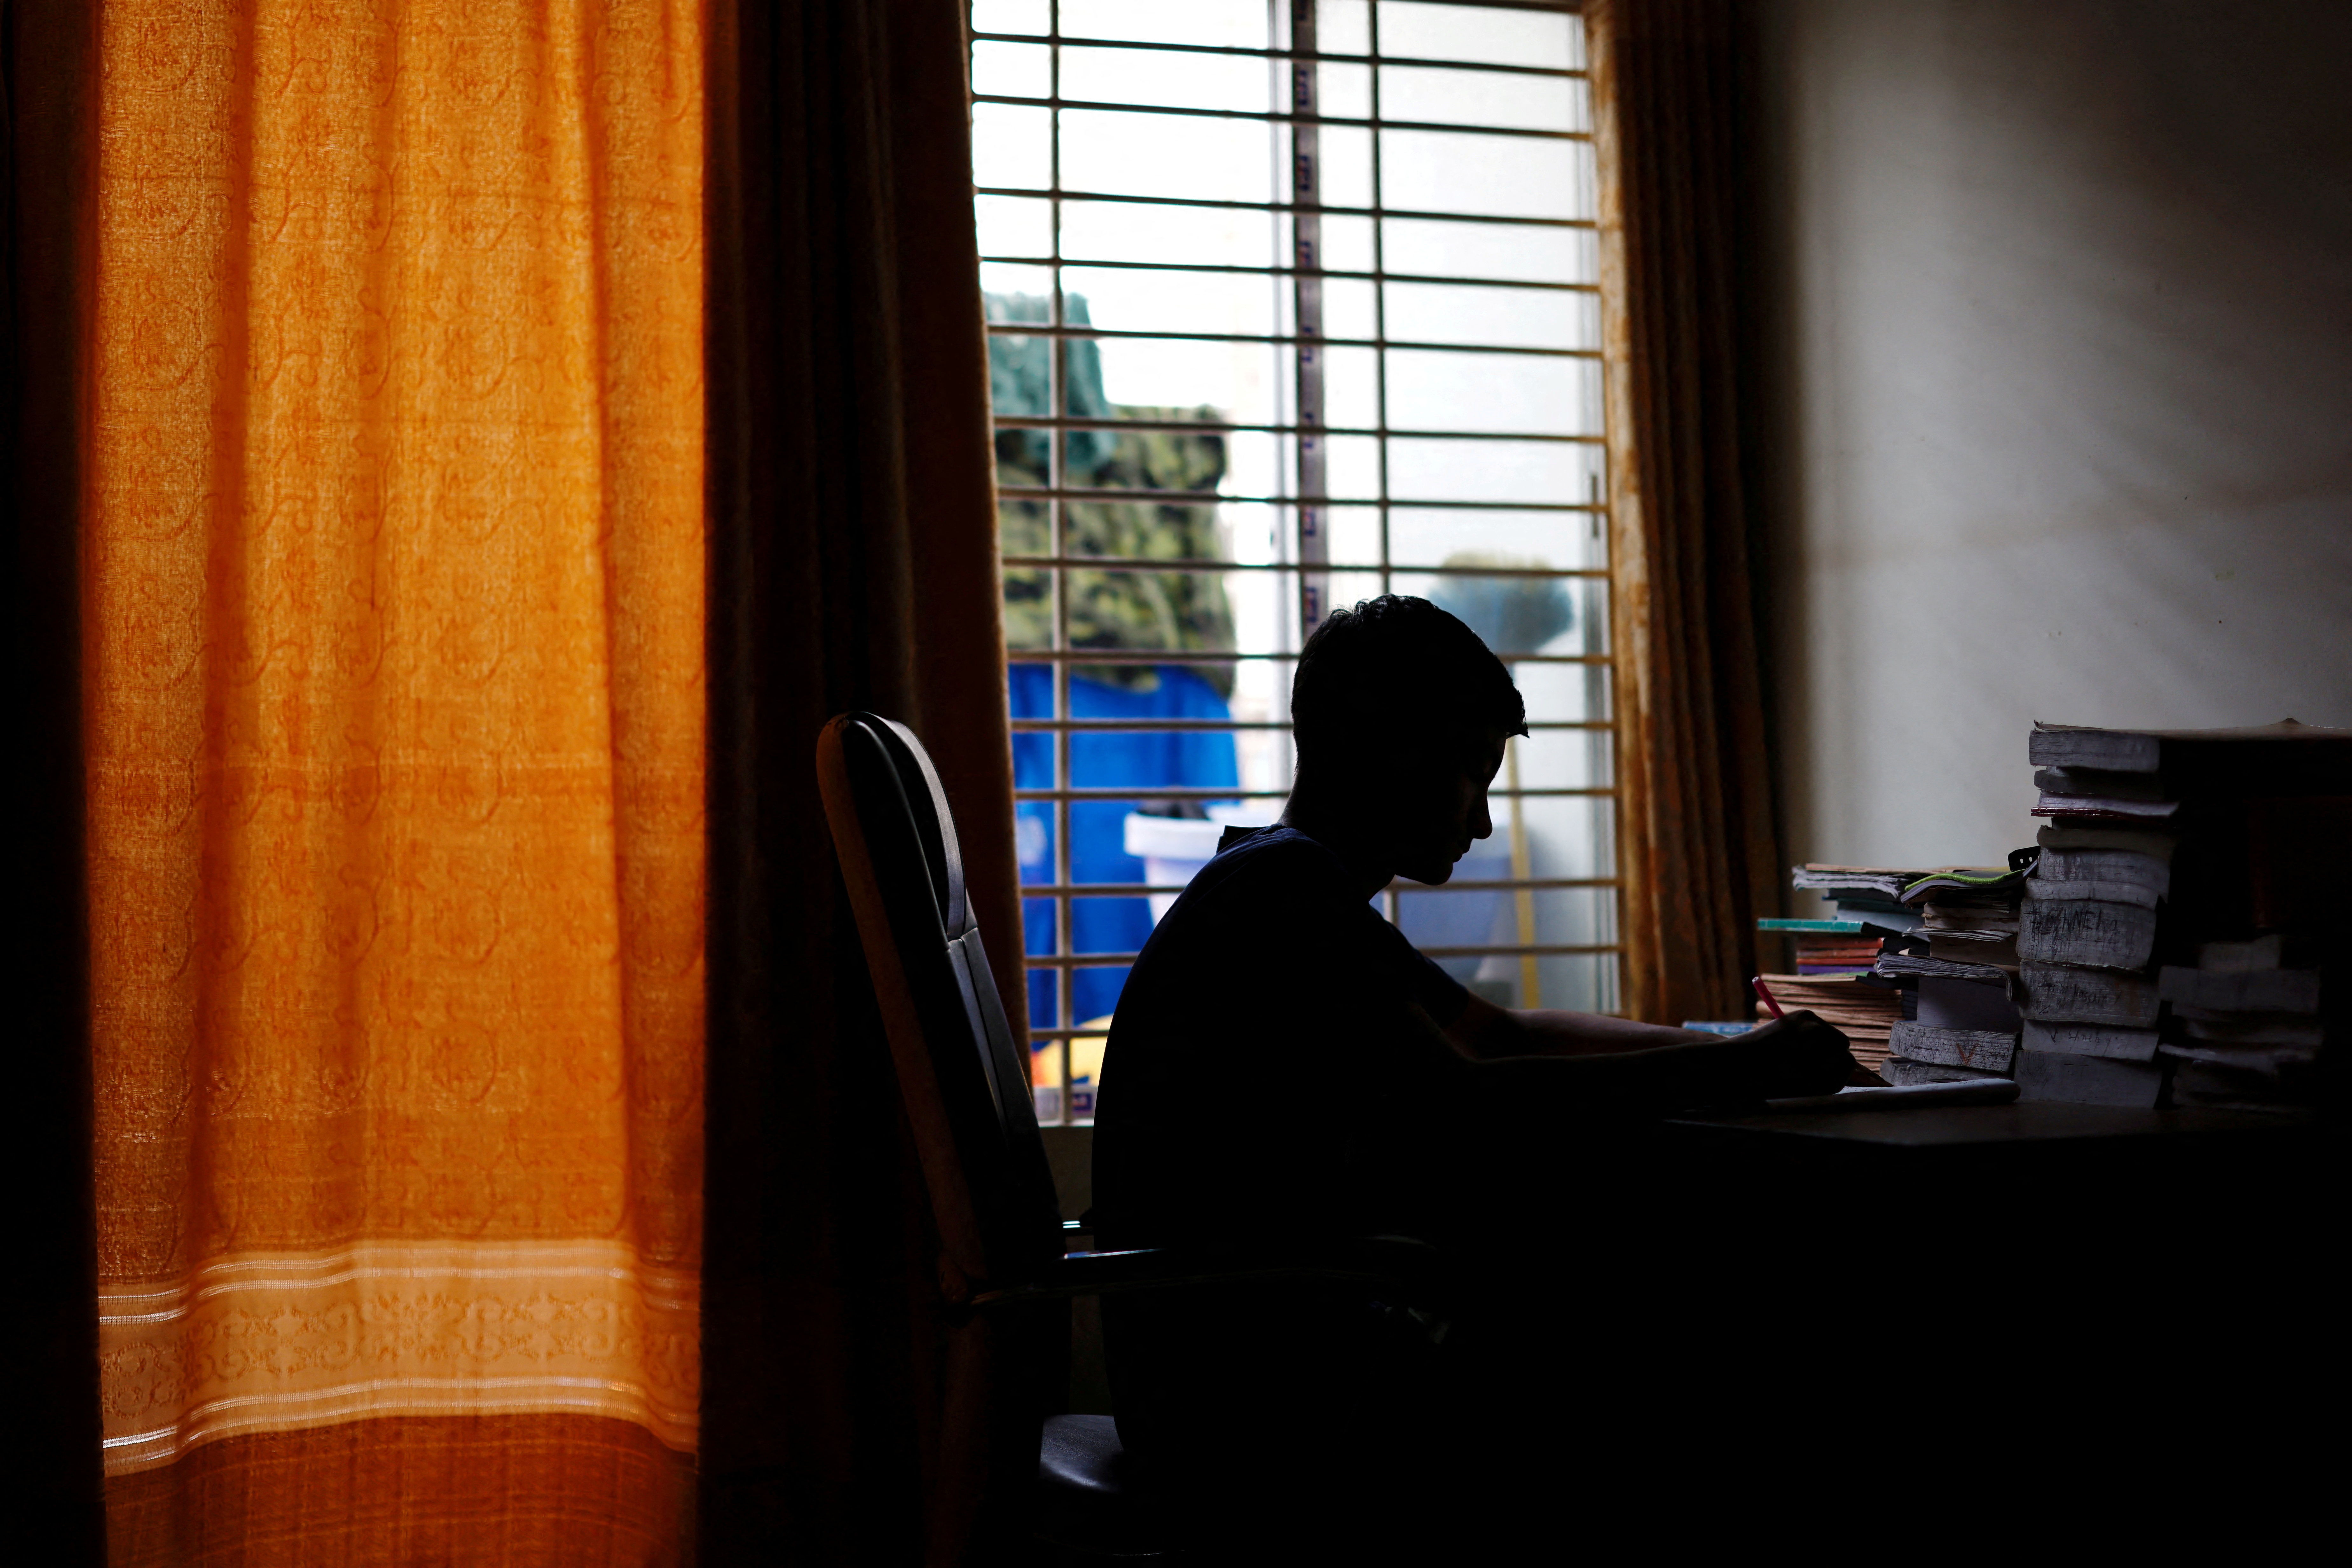 Sheikh Tamim Hasan, 13, a student of class seven, studies in his room as authorities decided to close schools during countrywide heatwave in Dhaka